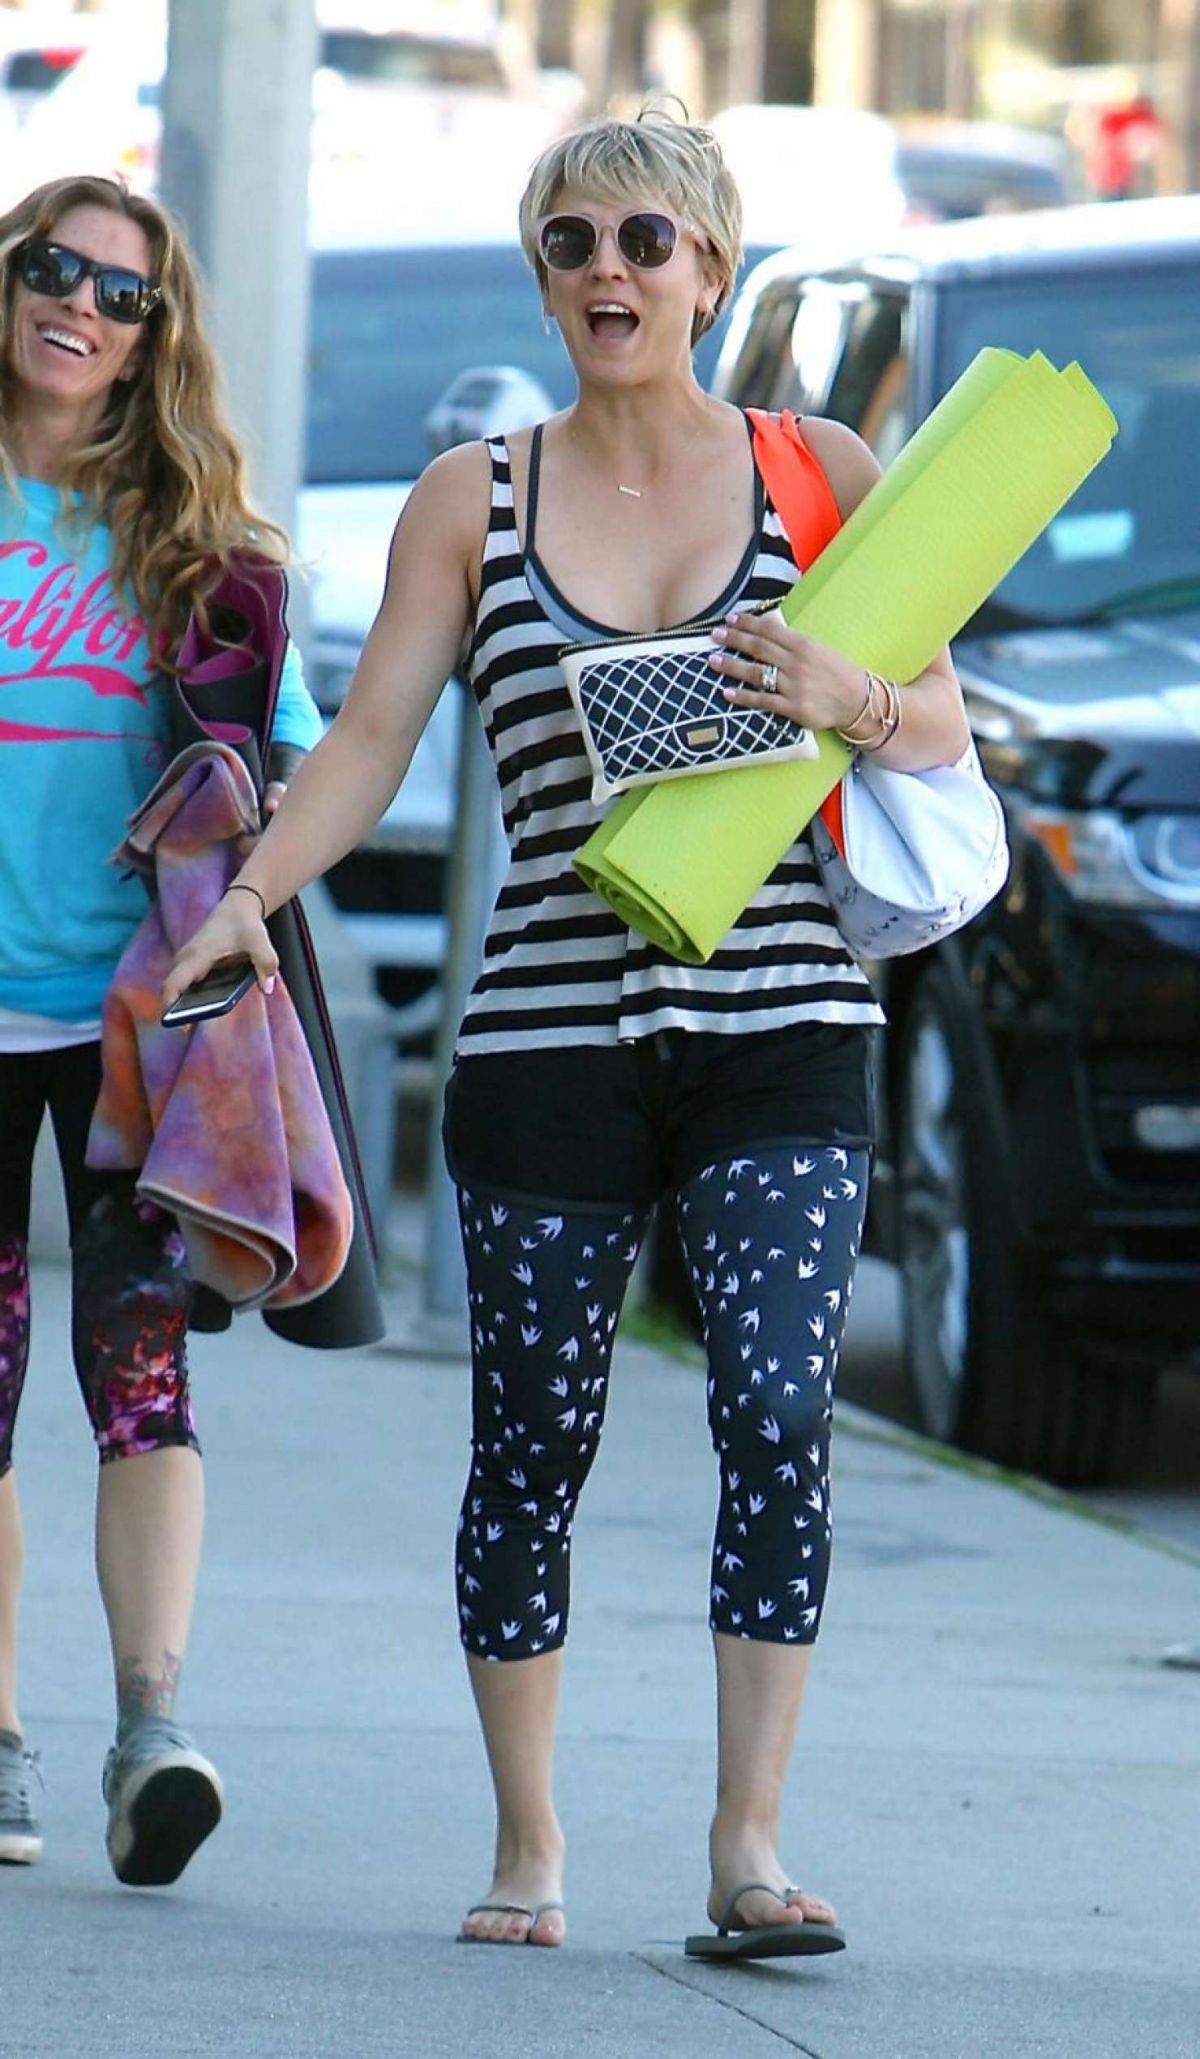 Kaley Cuoco Heading To Yoga Class In Hollywood March 2015 – Star Style